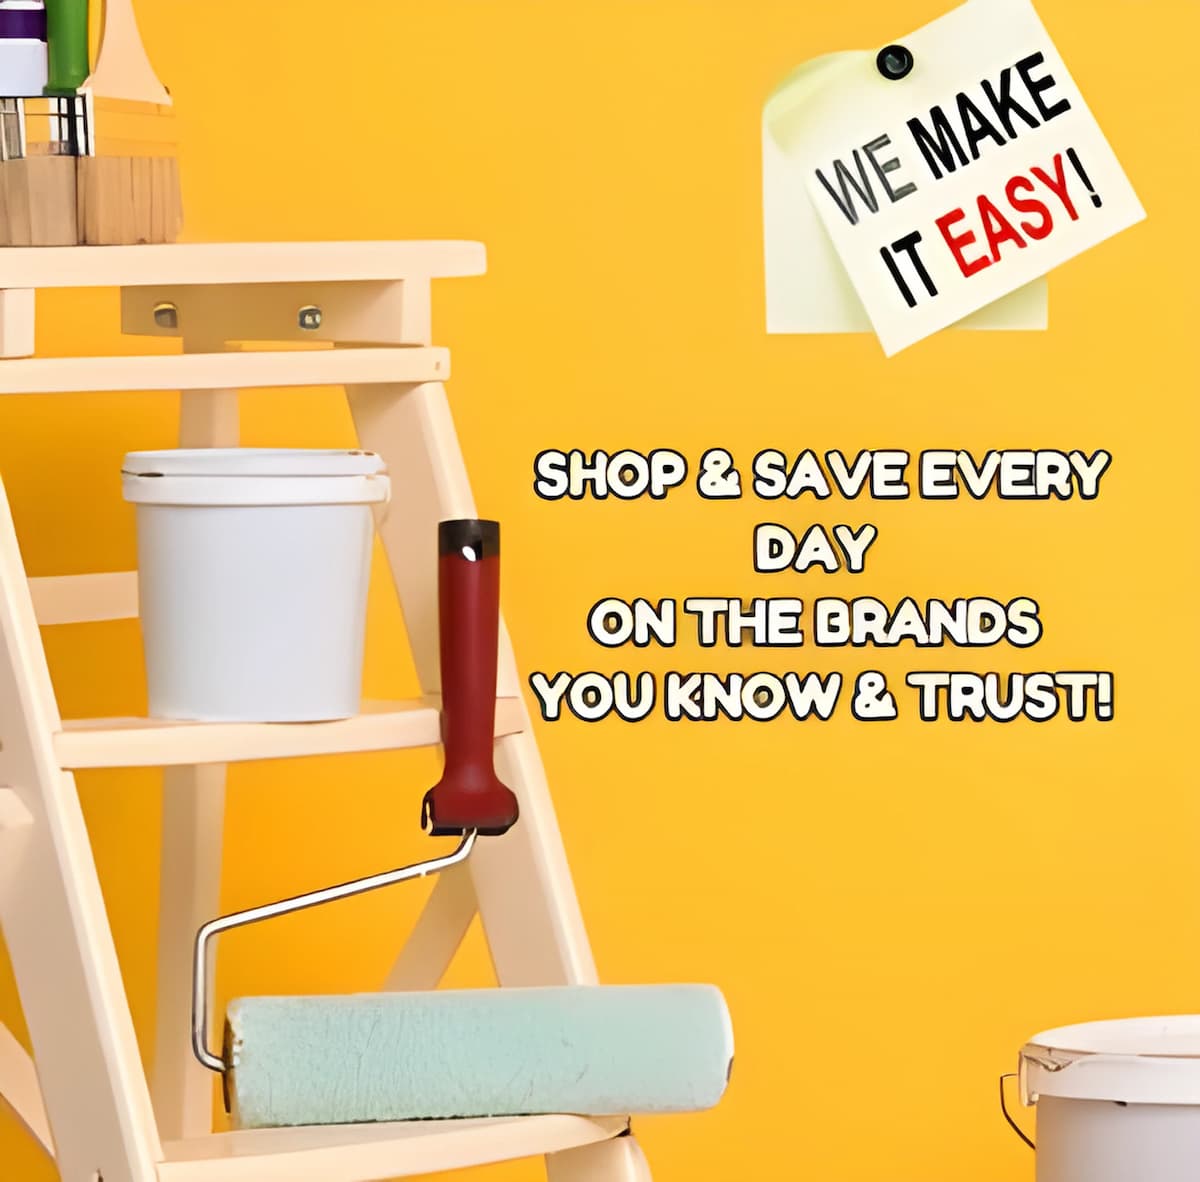 Shop at ThePaintStore.com and save every day on the brands you know & trust.